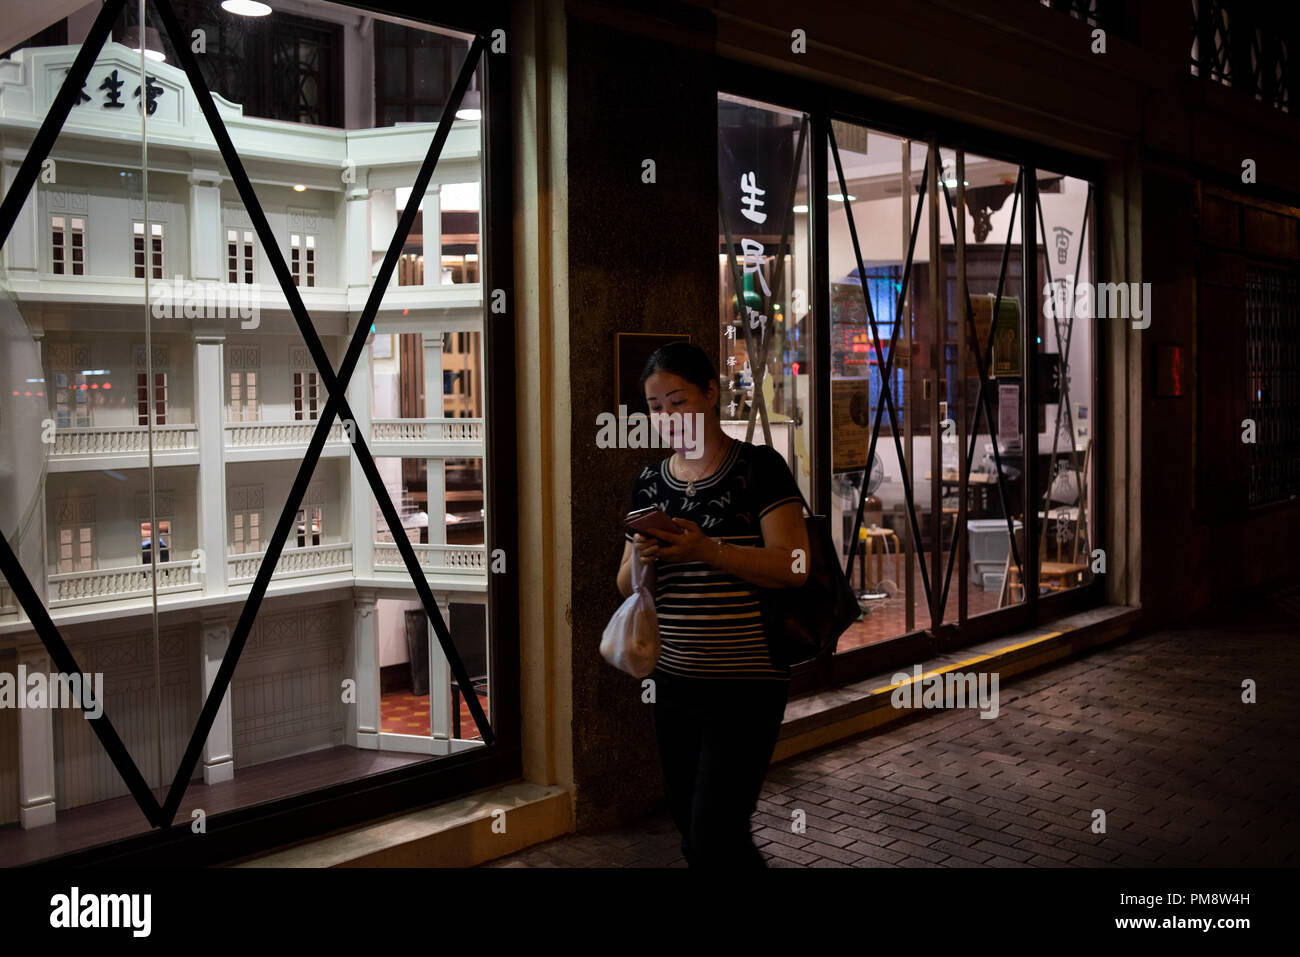 A pedestrian seen passing by Hong Kong Baptist University School of Chinese Medicine Lui Seng Chun with taped windows and doors. Windows and doors of buildings have been taped ahead of Super Typhoon Mangkhut arrival in Hong Kong, China. It is expected to land with a typhoon signal No. 8. Stock Photo